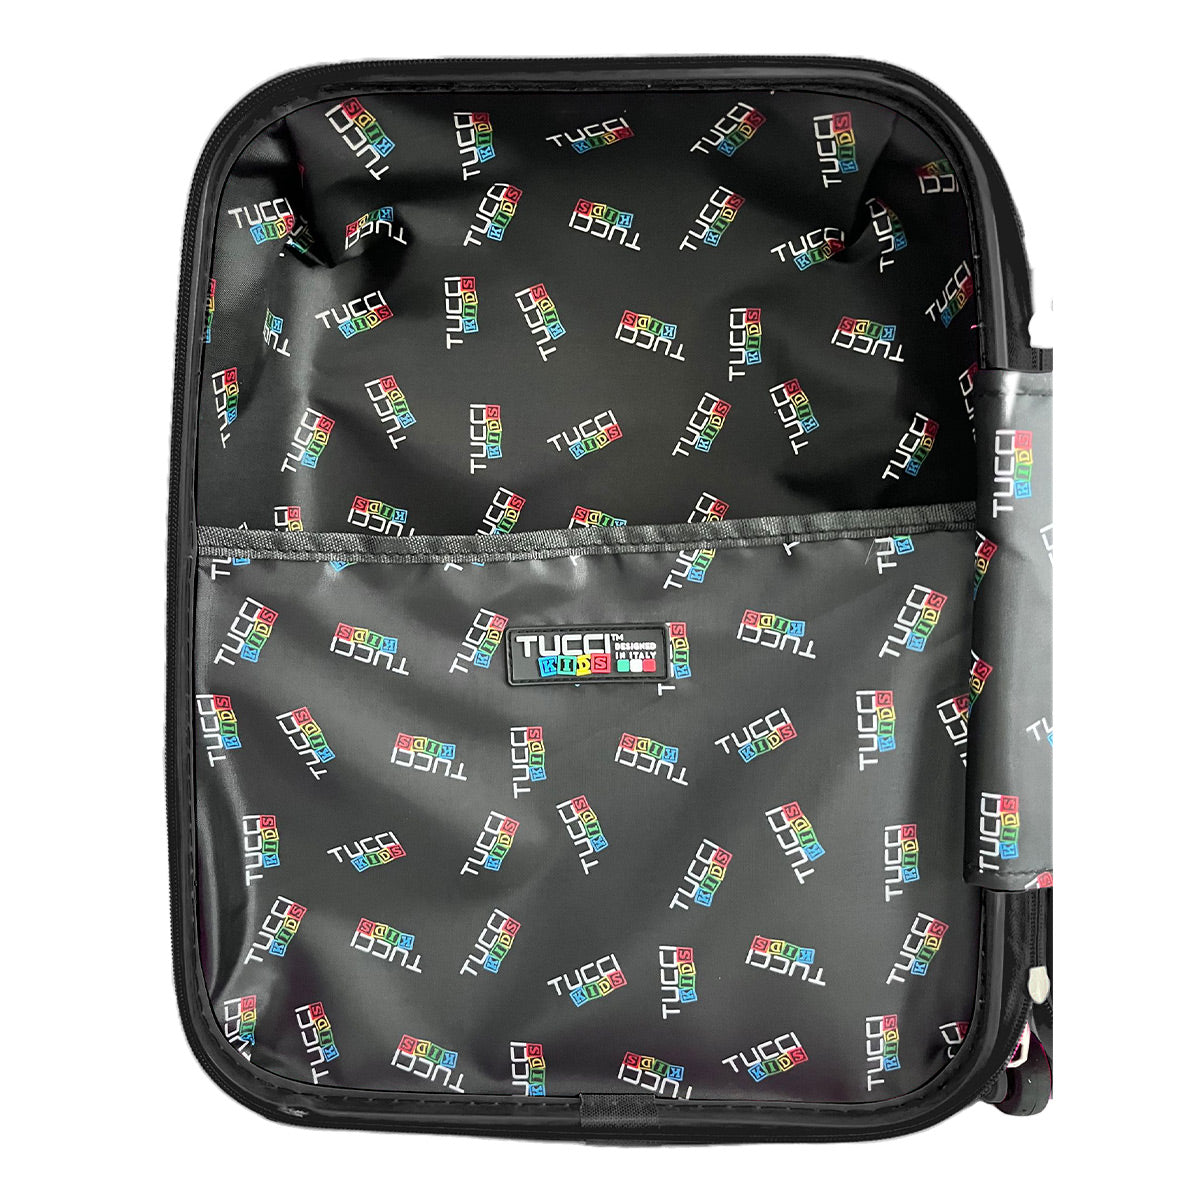 TUCCI Baby Dino Kids' ABS Hardside 3D Suitcase